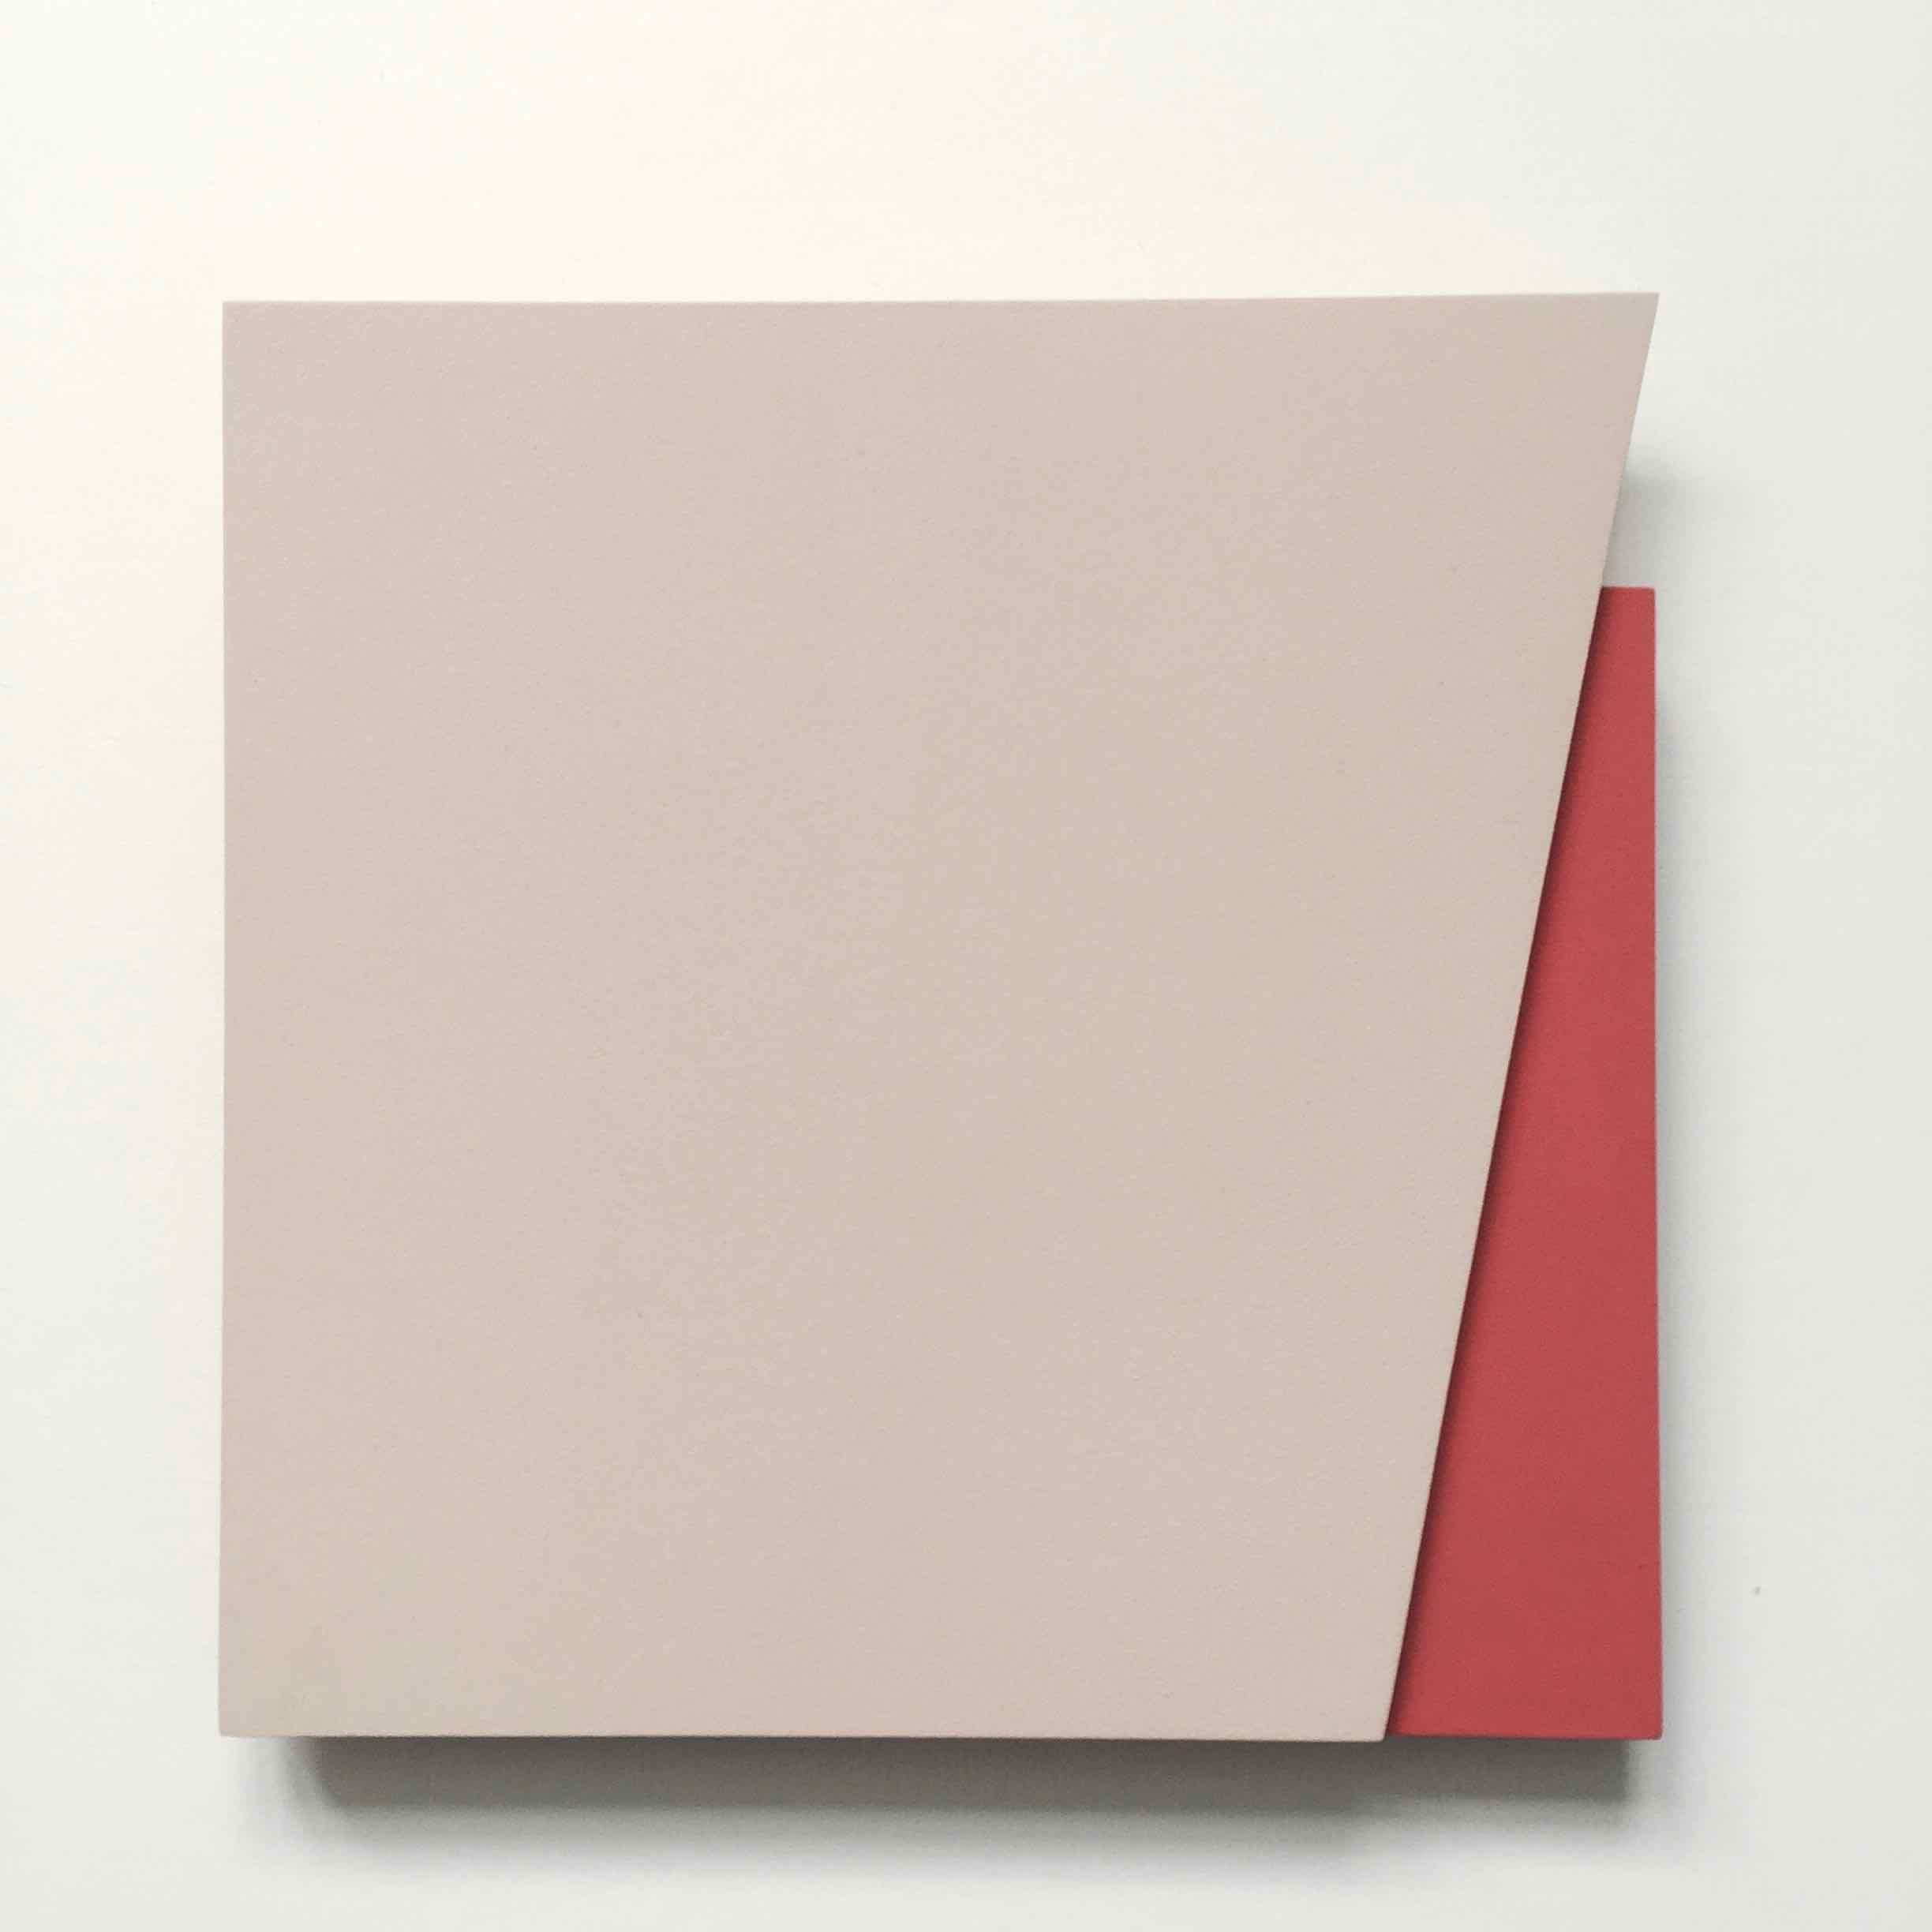 'Cut-out 20': Set of Four Minimal Hard Edge Abstract Paintings – Sculpture von Laura Jane Scott